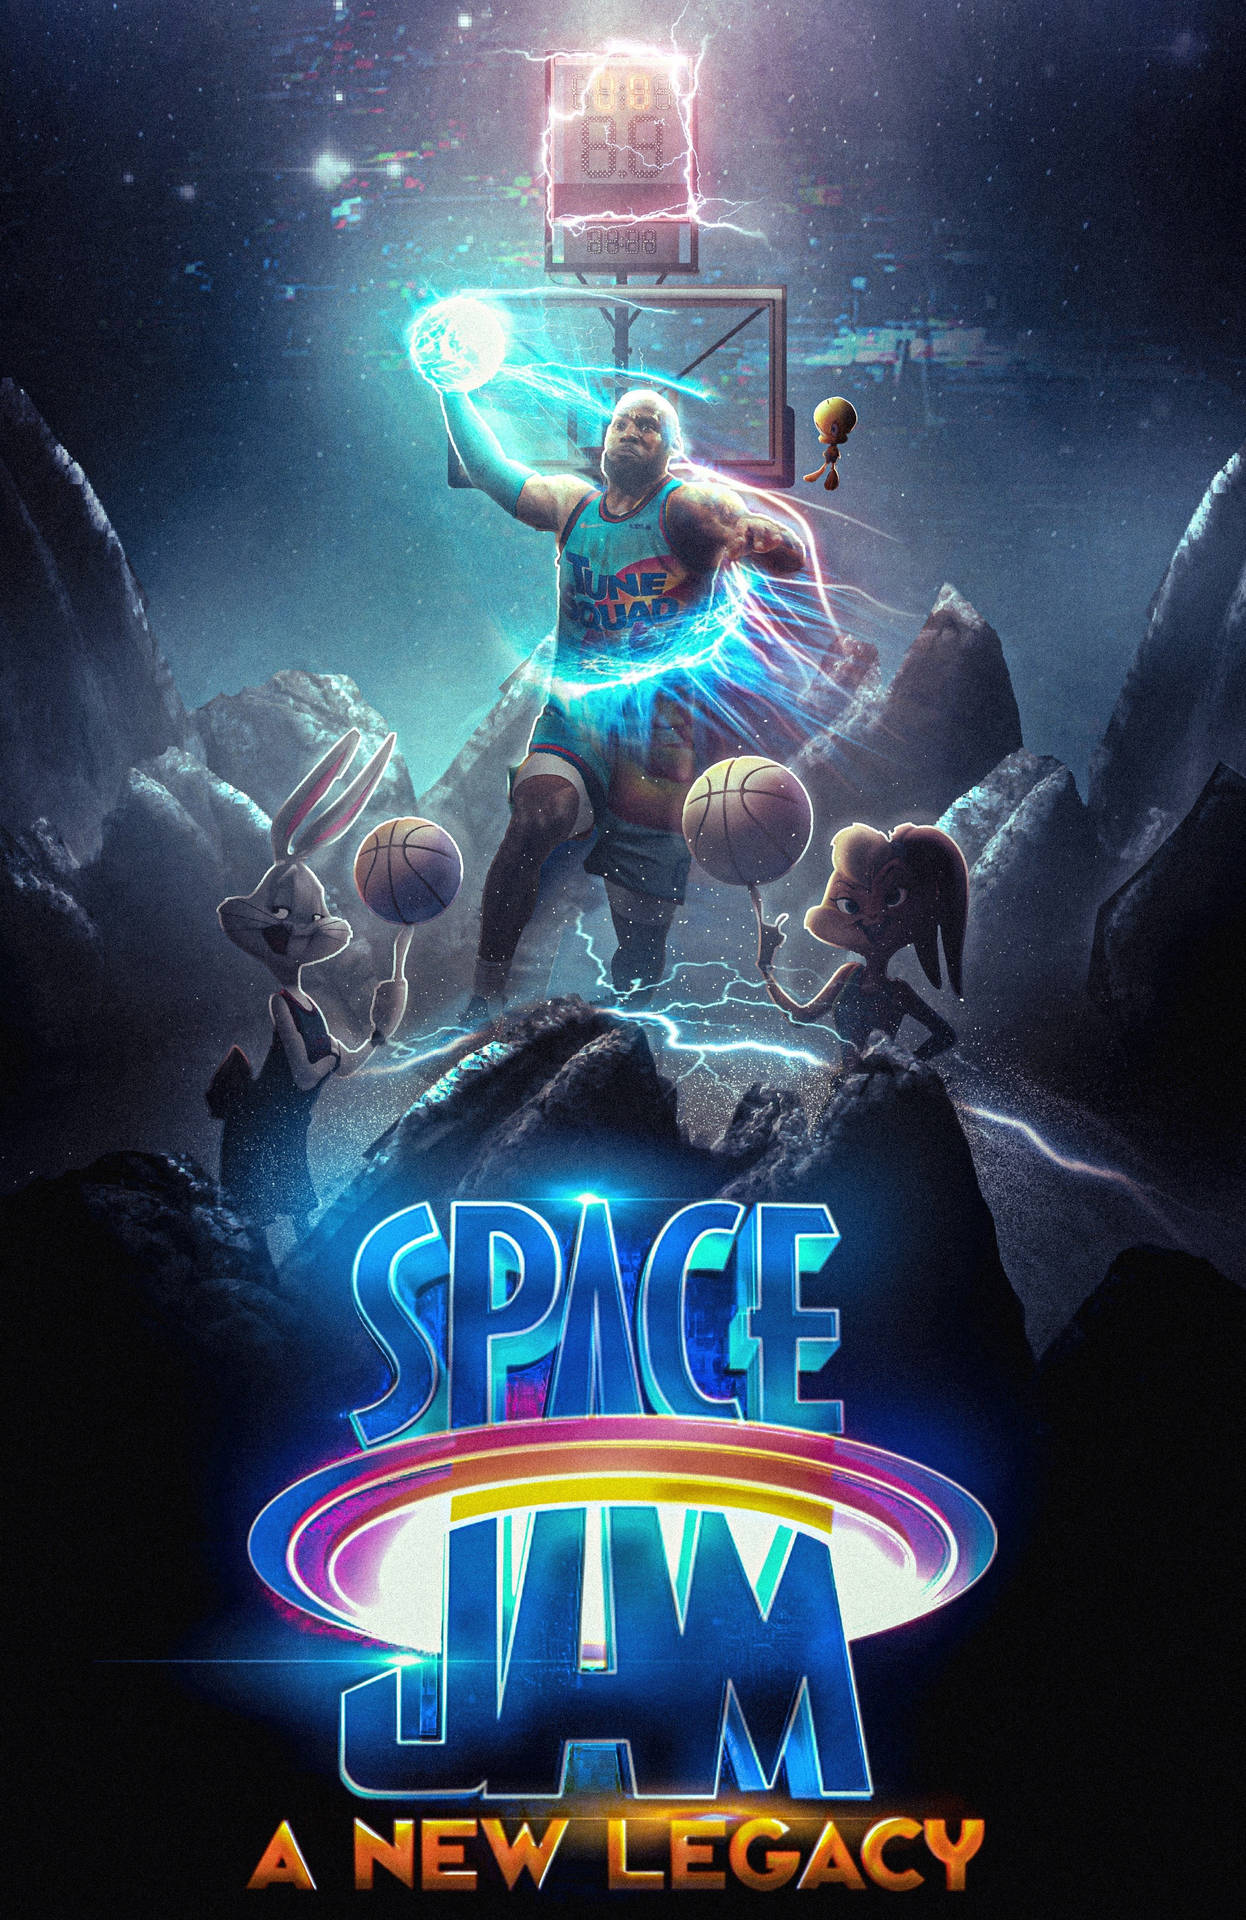 Get Ready For More Intergalactic Fun In Space Jam 2 Wallpaper